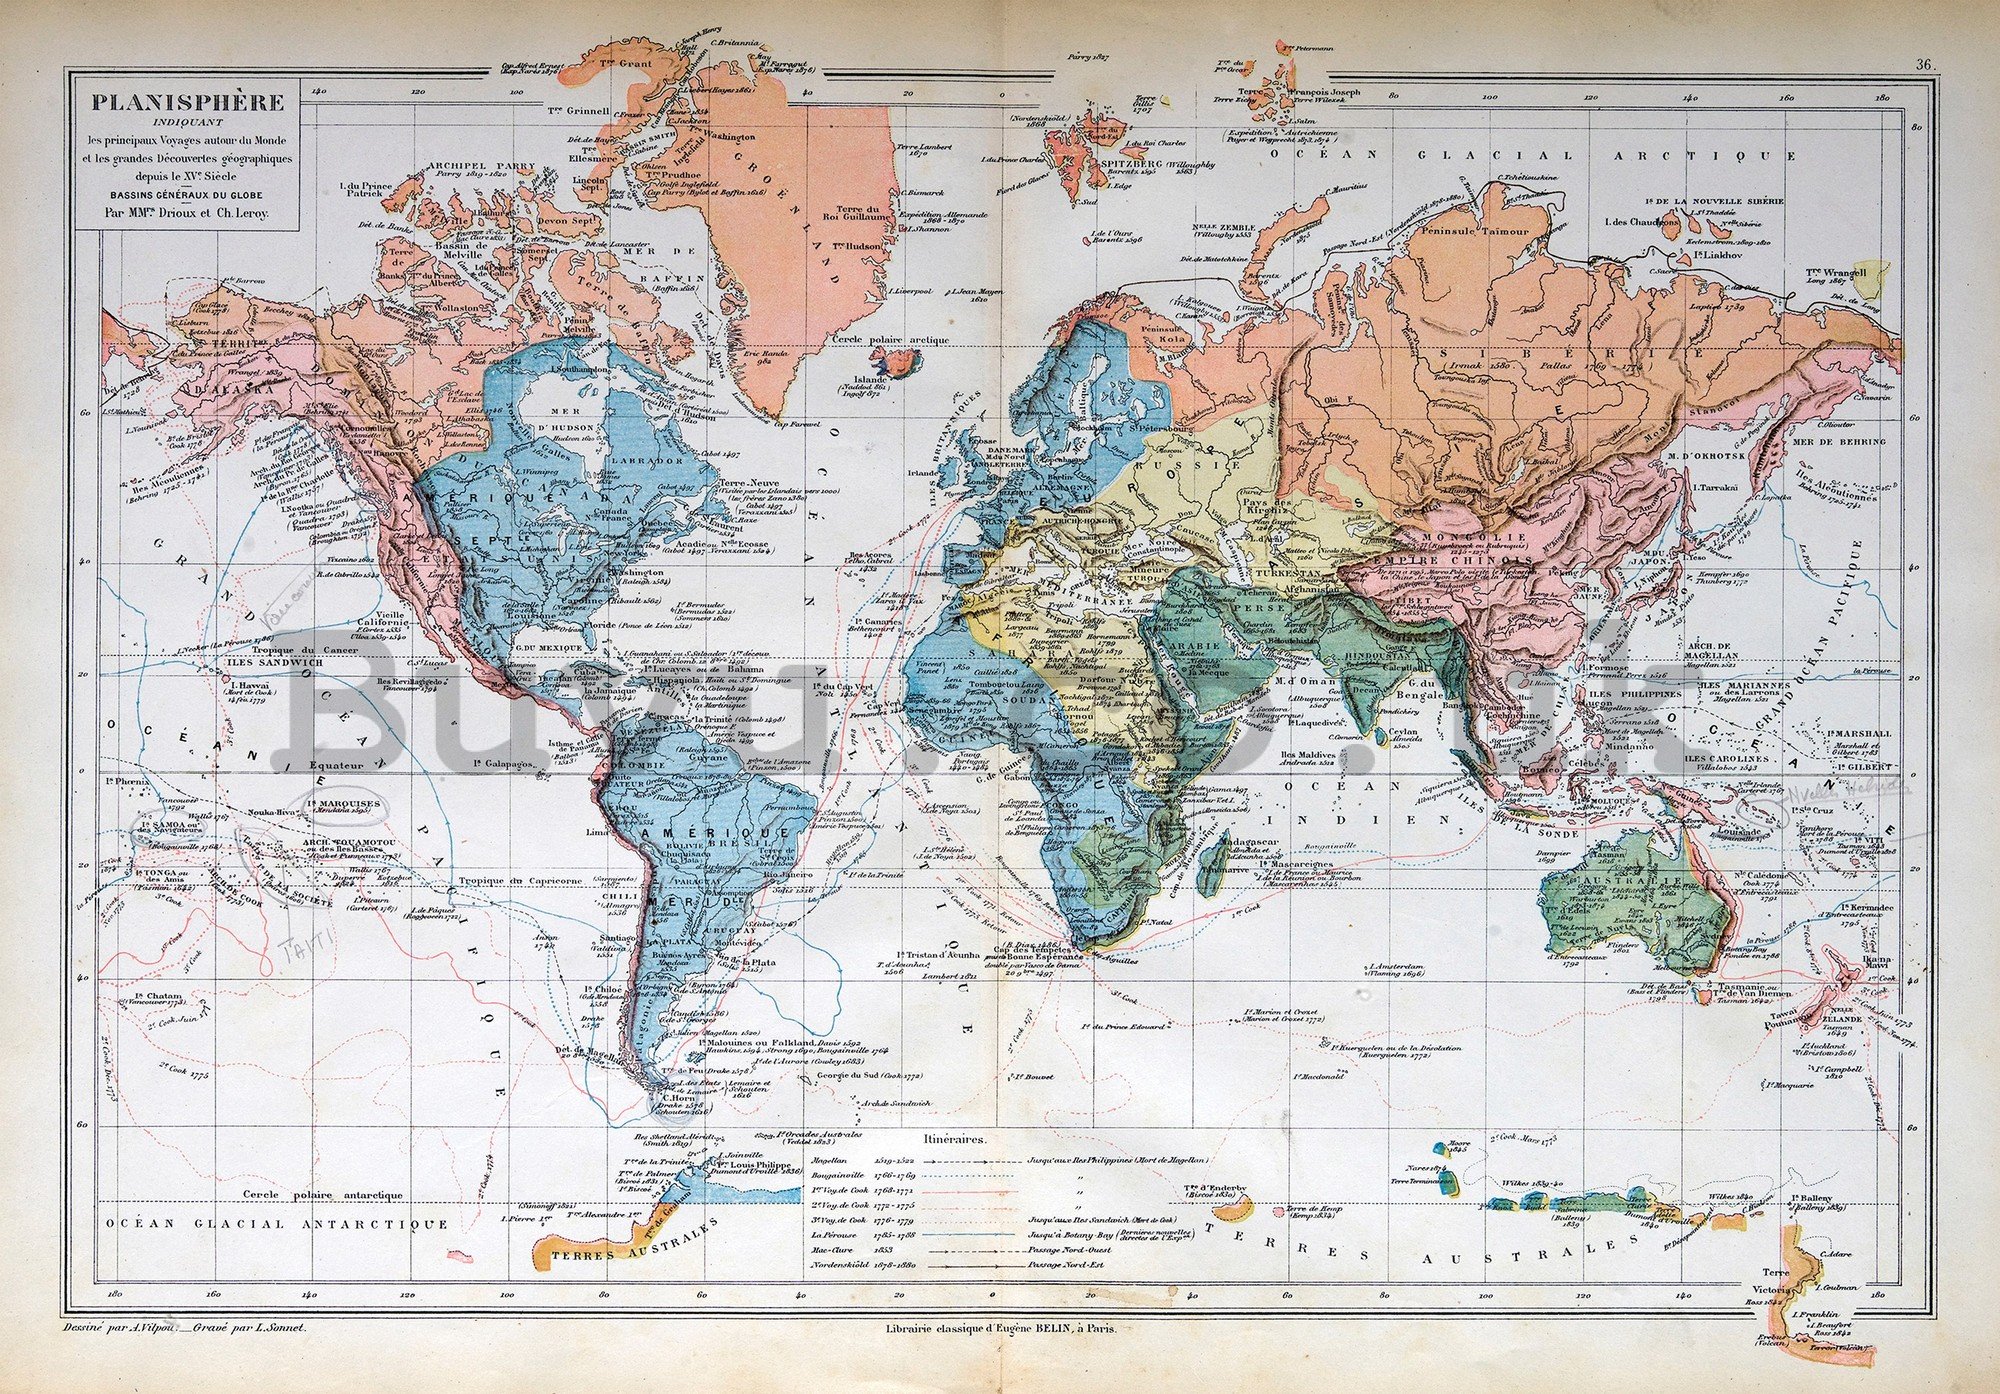 Wall mural vlies: French World Map (Vintage) - 368x254 cm